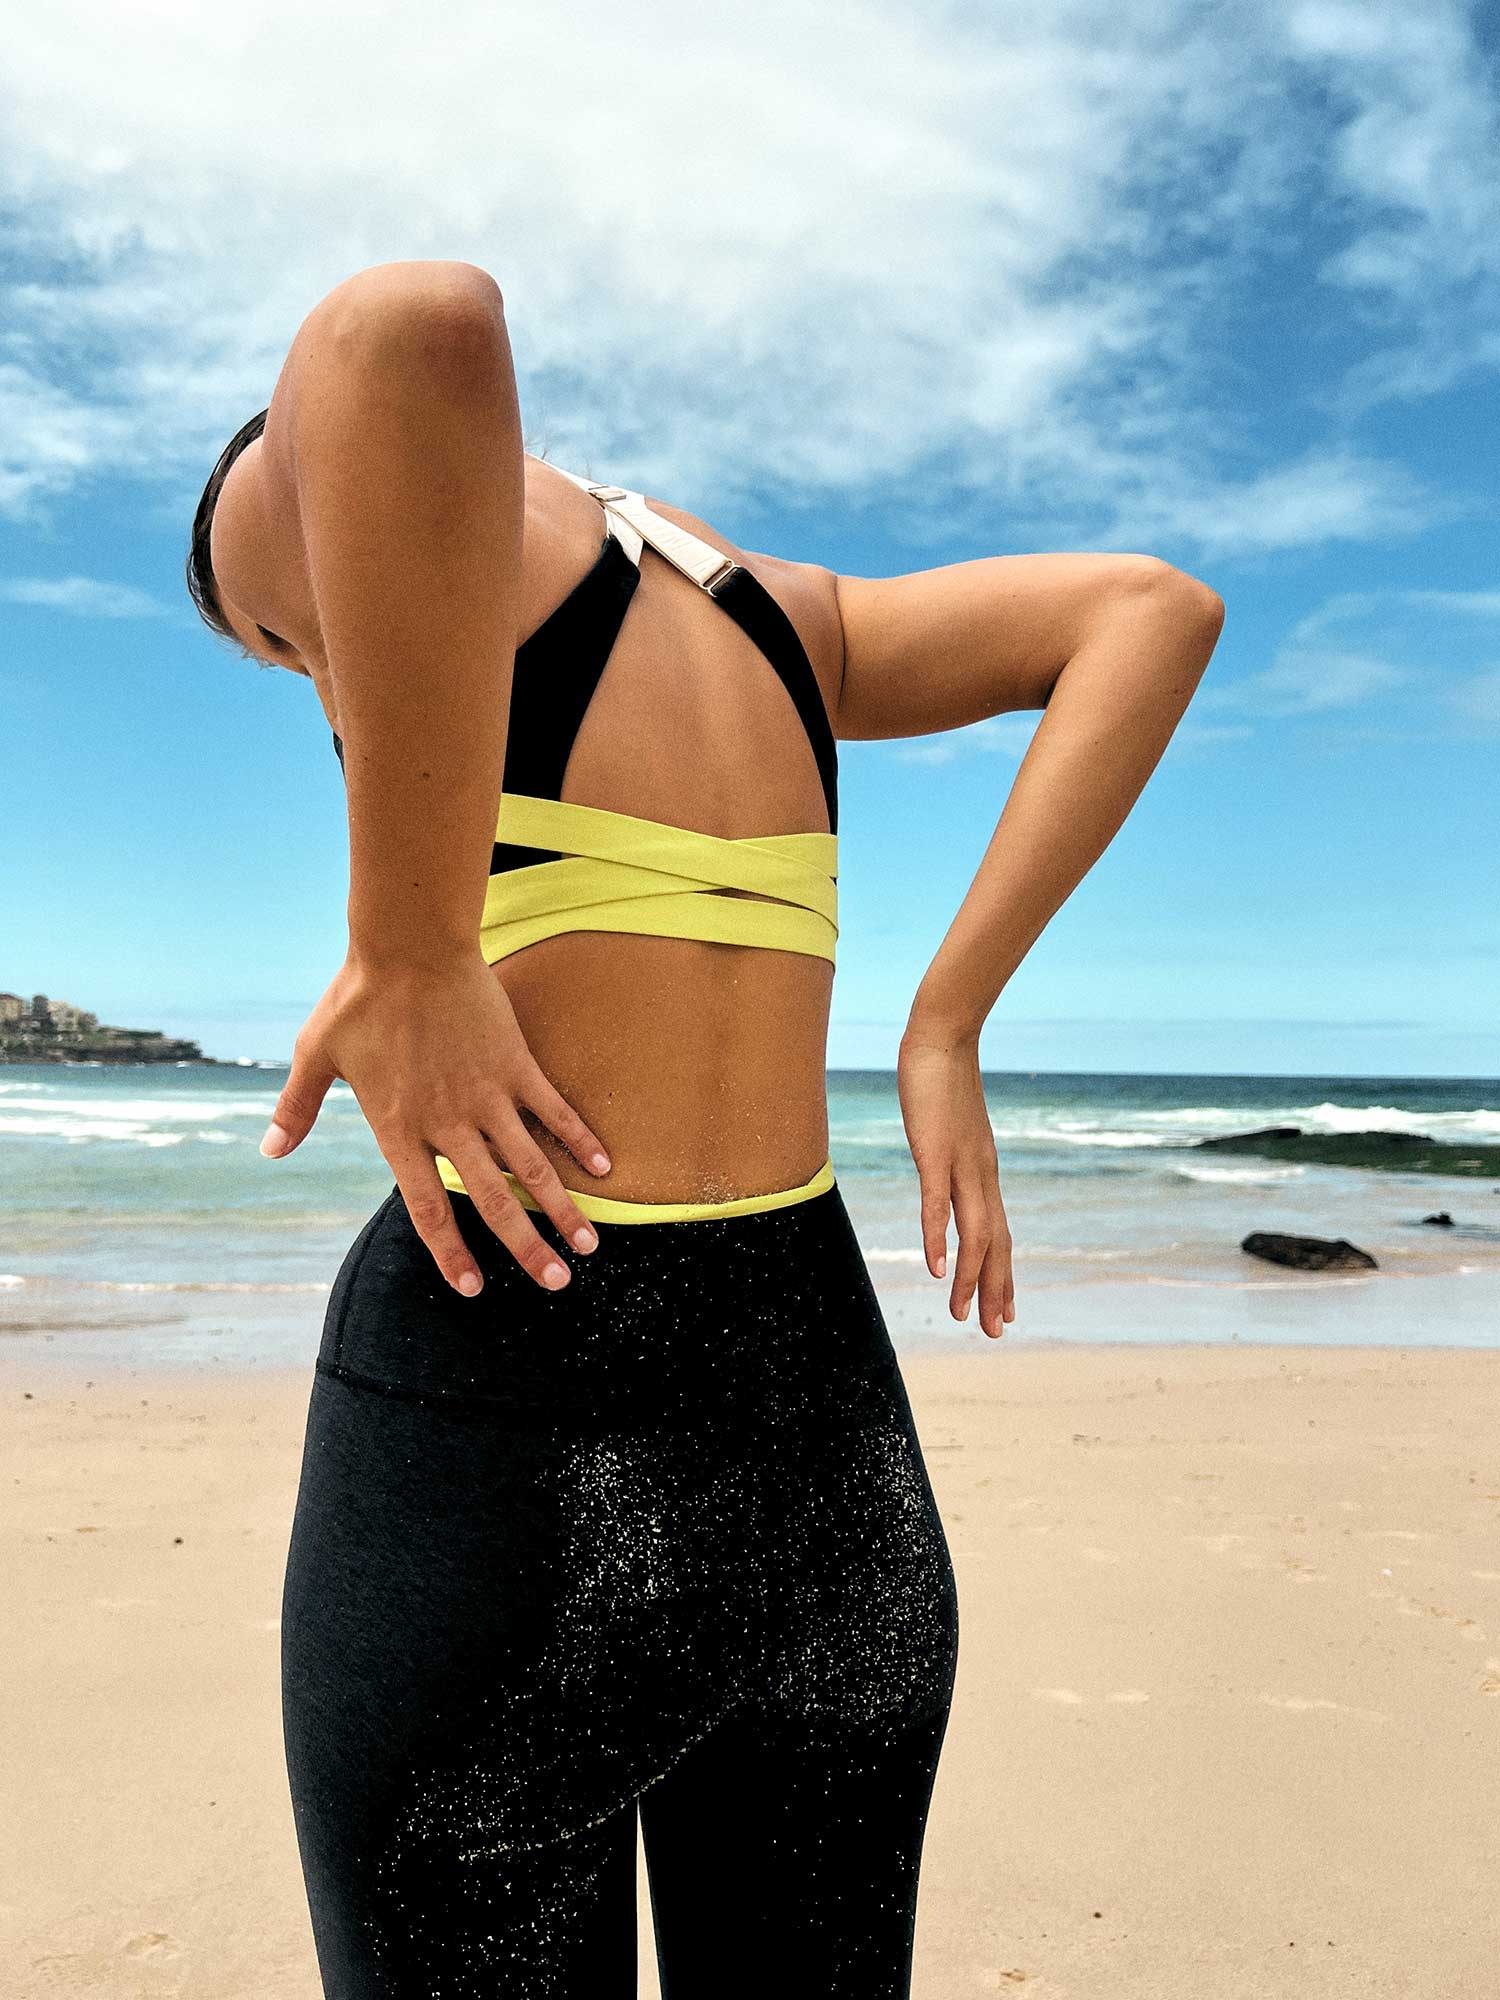 Girl on a beach wearing activewear